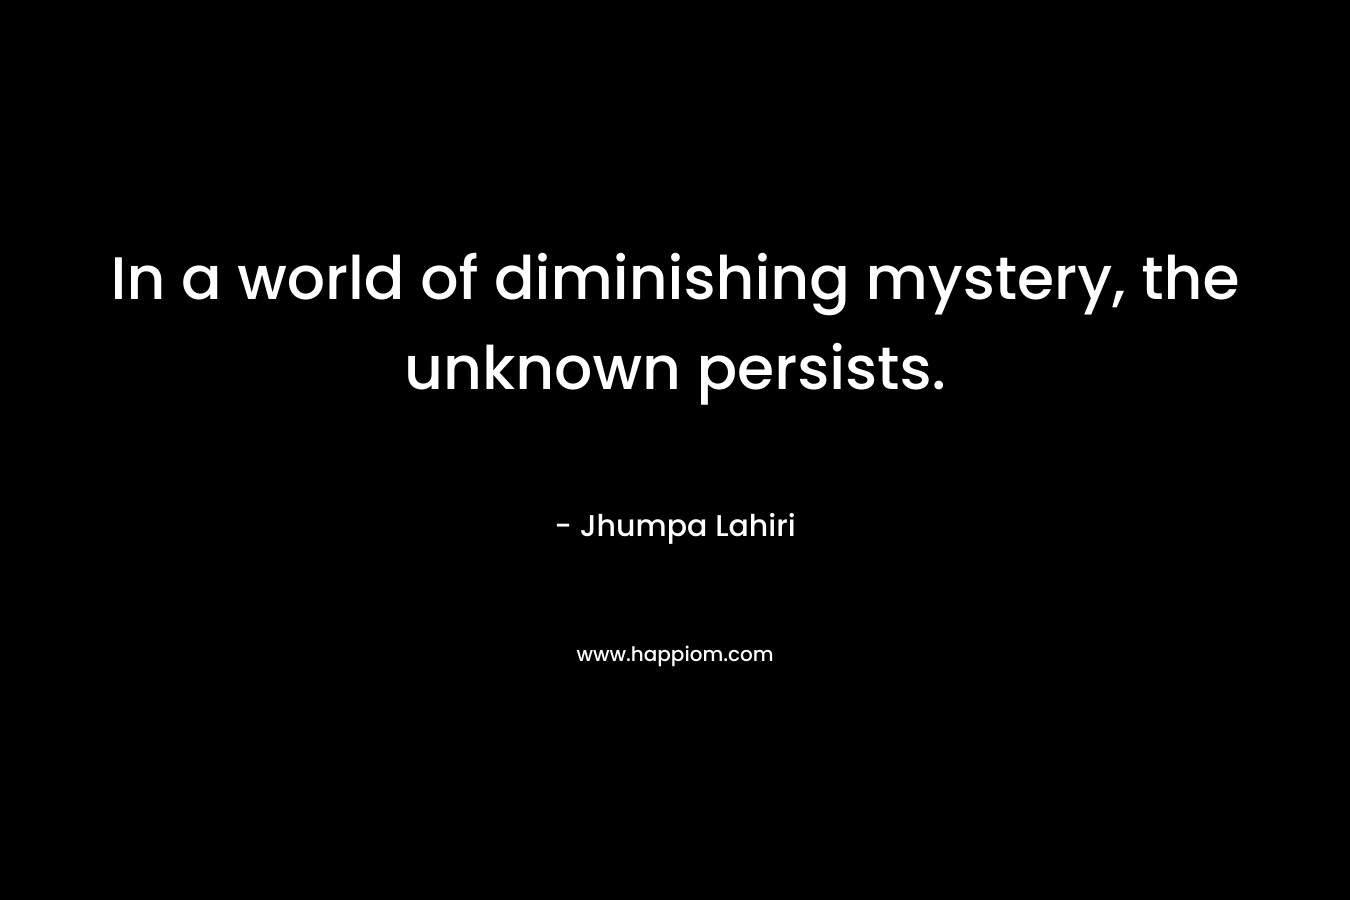 In a world of diminishing mystery, the unknown persists.